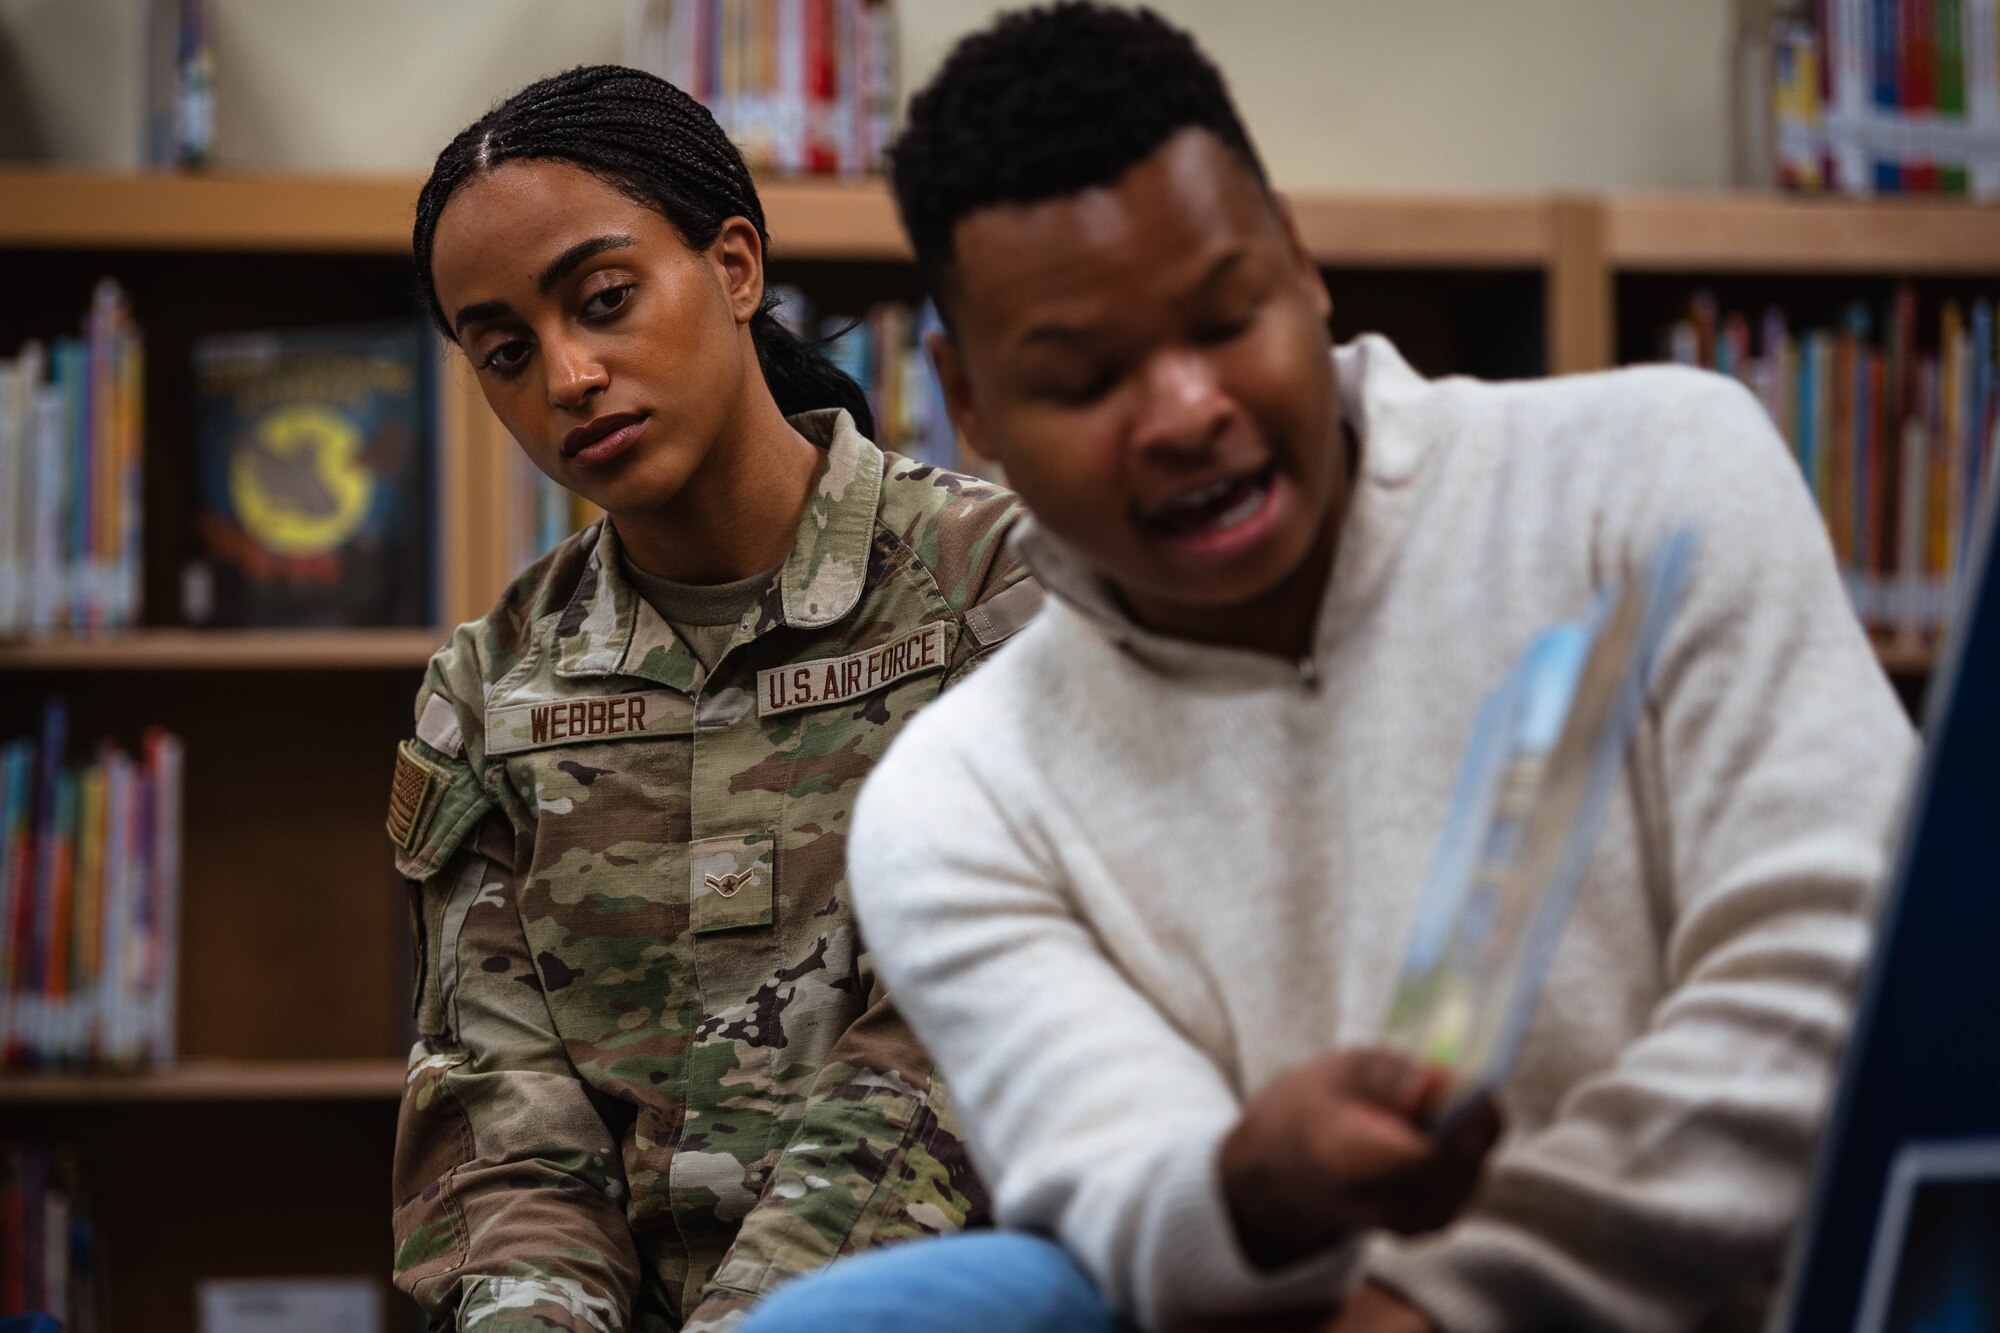 U.S. Air Force Airman Sheyenne Webber, 56th Judge Advocate military justice paralegal, listens as Staff Sgt. Reginald Dean, 56th Component Maintenance Squadron weapon systems coordinator, reads to children and their parents during a Black History Month story-time event at the base library.